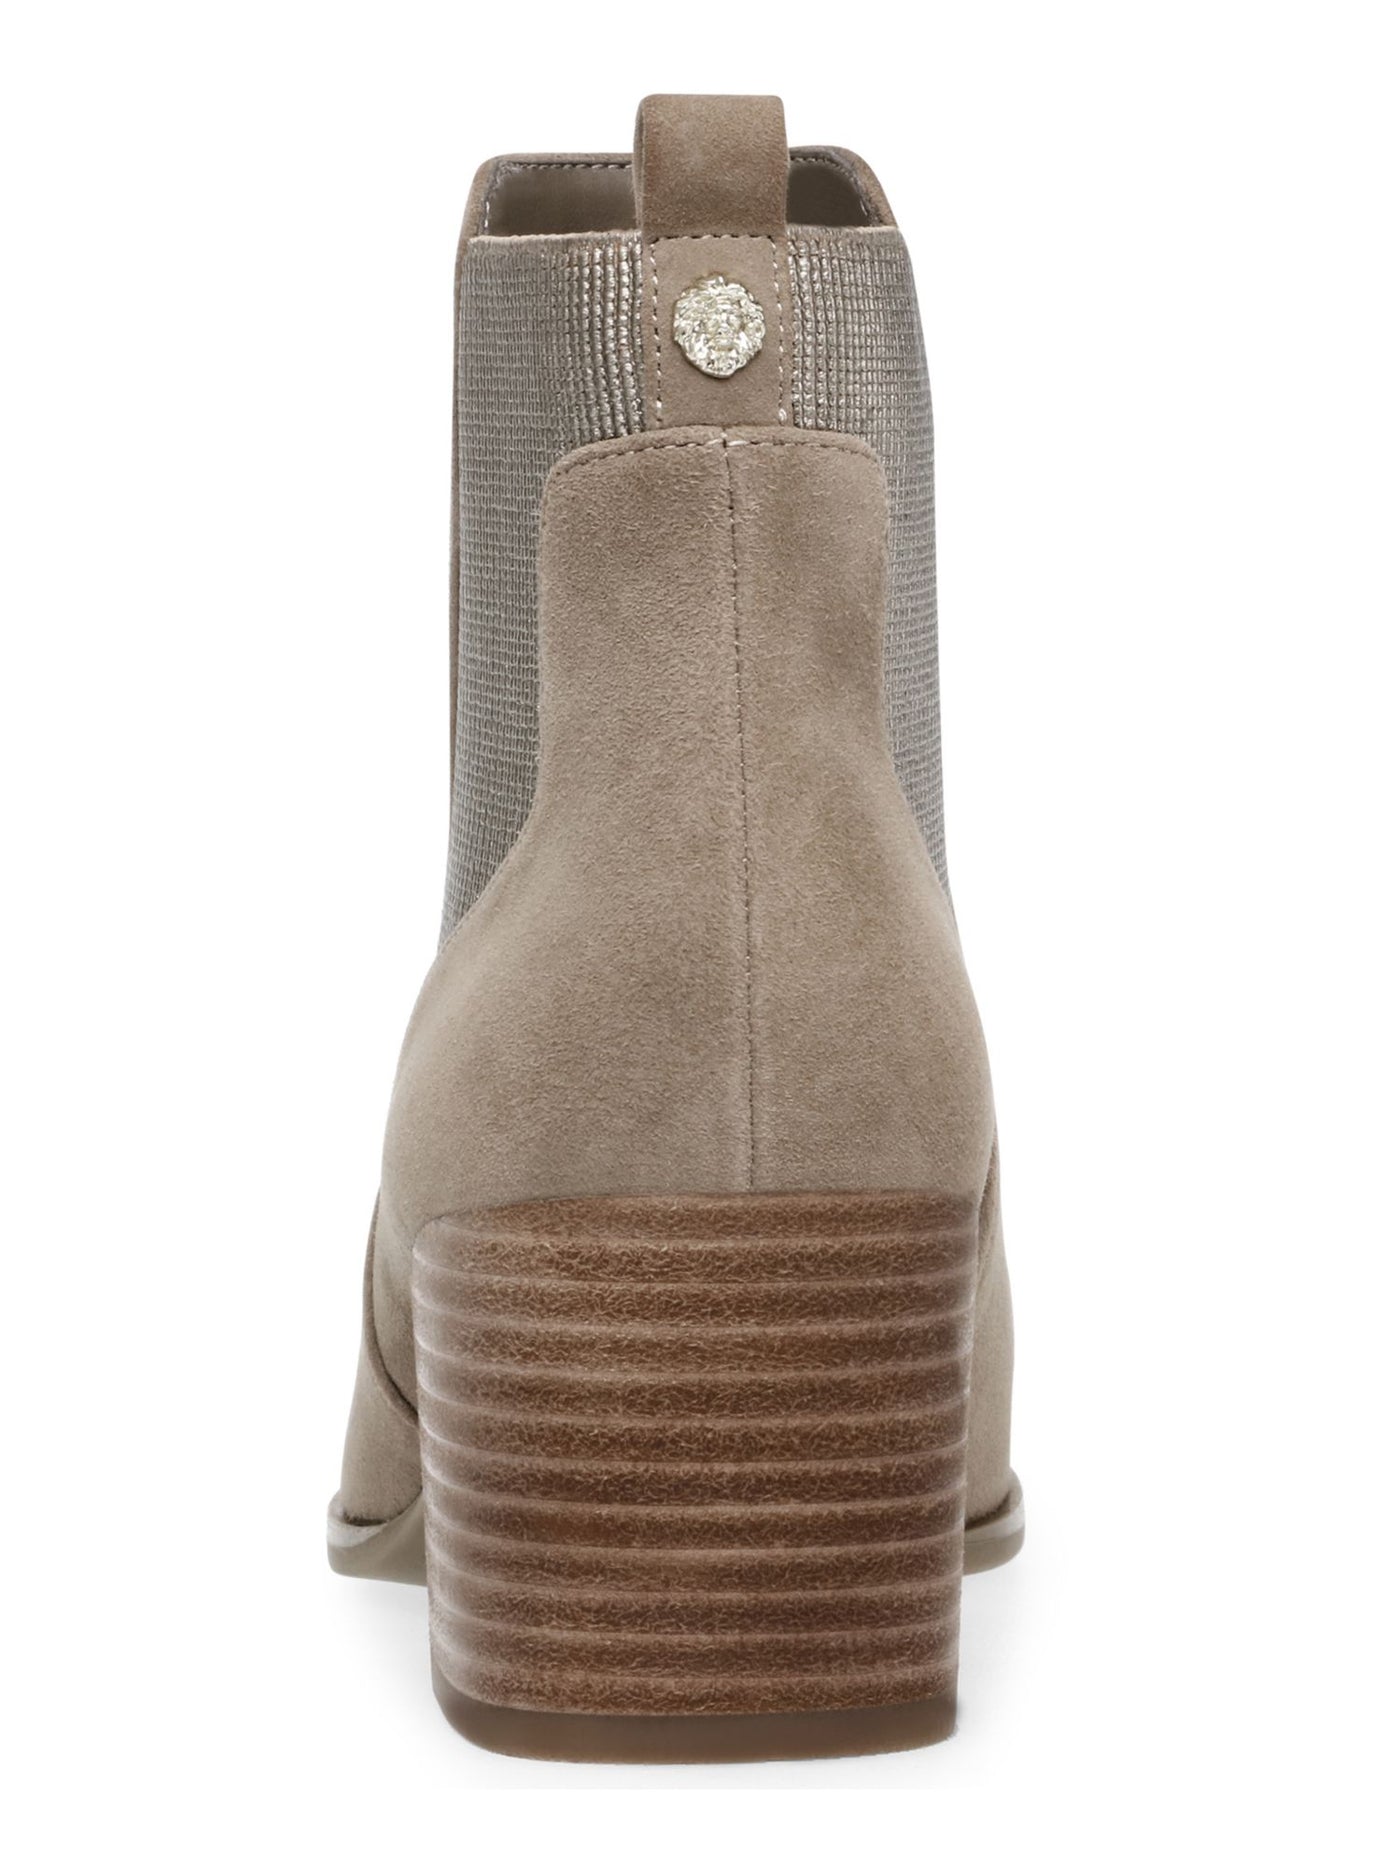 ANNE KLEIN Womens Beige Chelsea Goring At Sides Comfort Breathable Cushioned Parson Square Toe Block Heel Booties 8.5 M